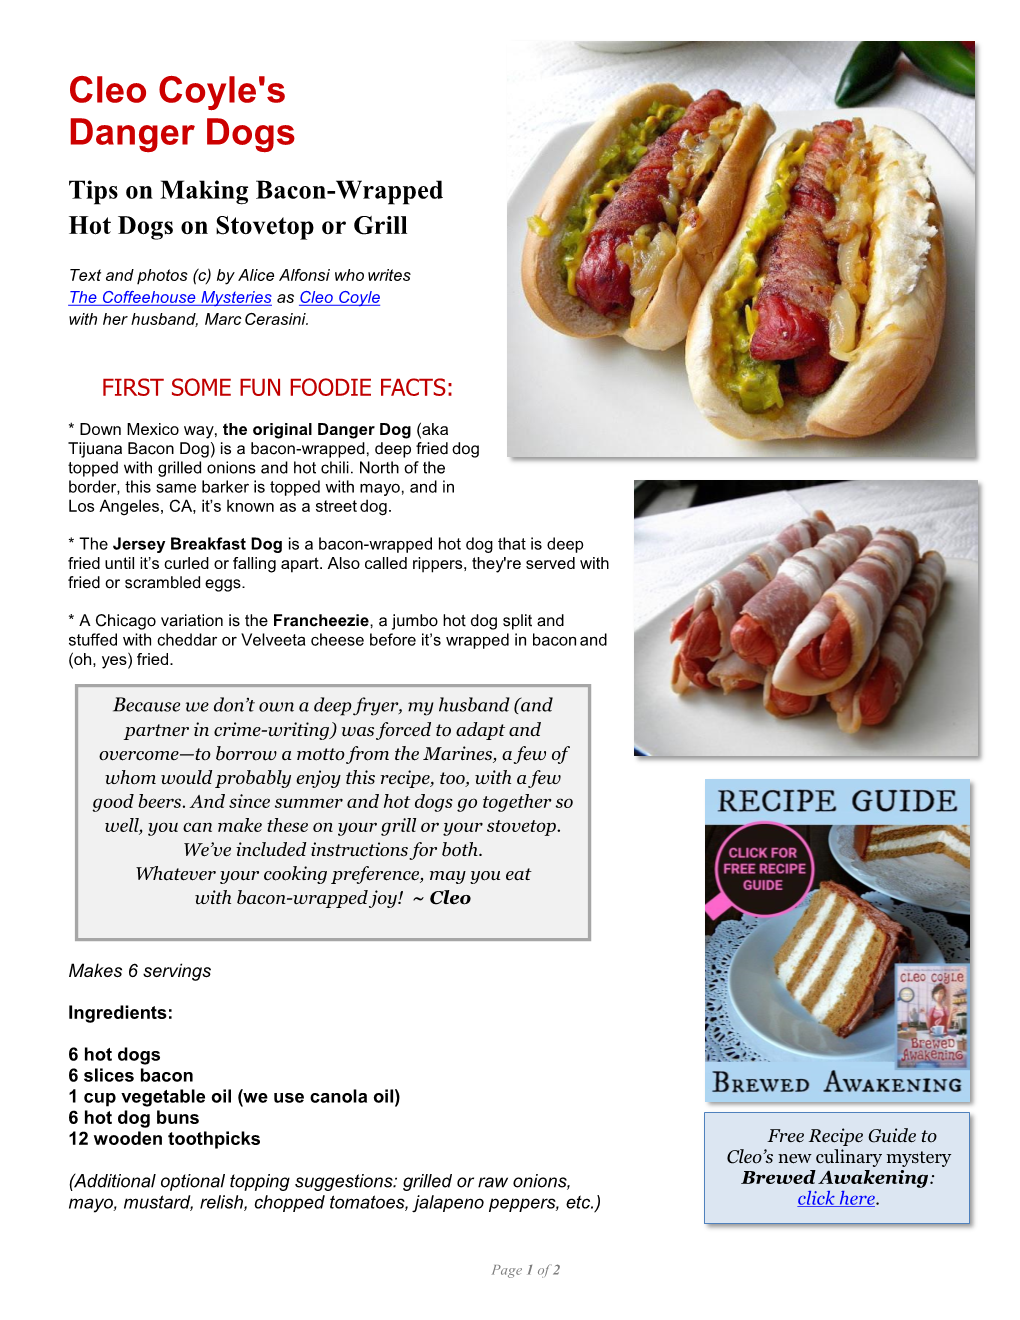 Tips on Making Bacon-Wrapped Hot Dogs on Stovetop Or Grill